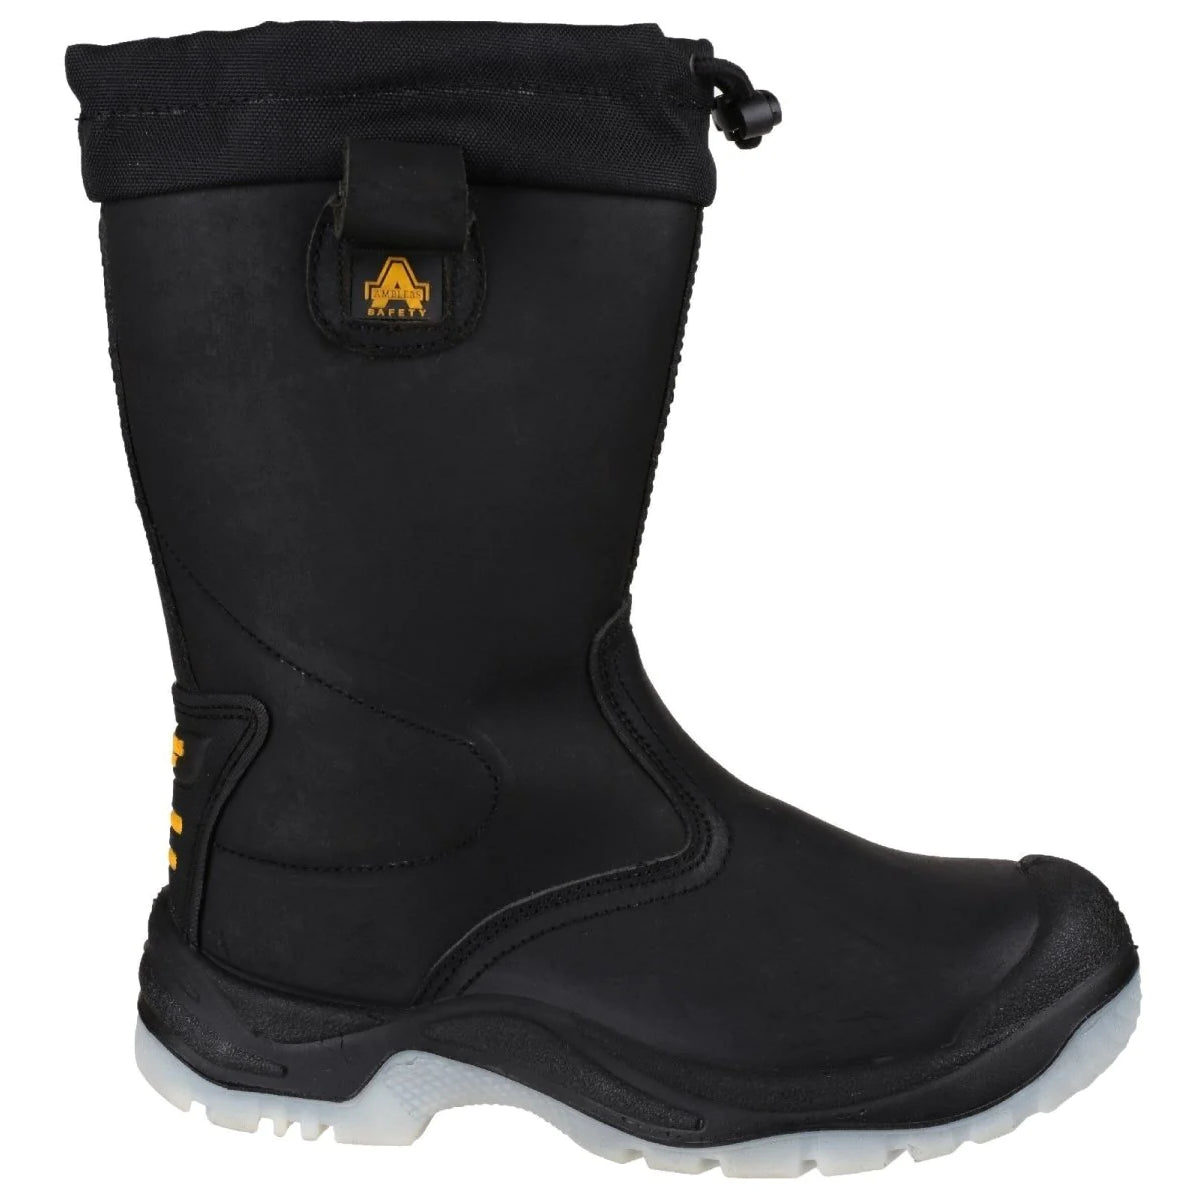 Amblers FS209 S3 Steel Toe & Midsole Safety Rigger Boots - Shoe Store Direct